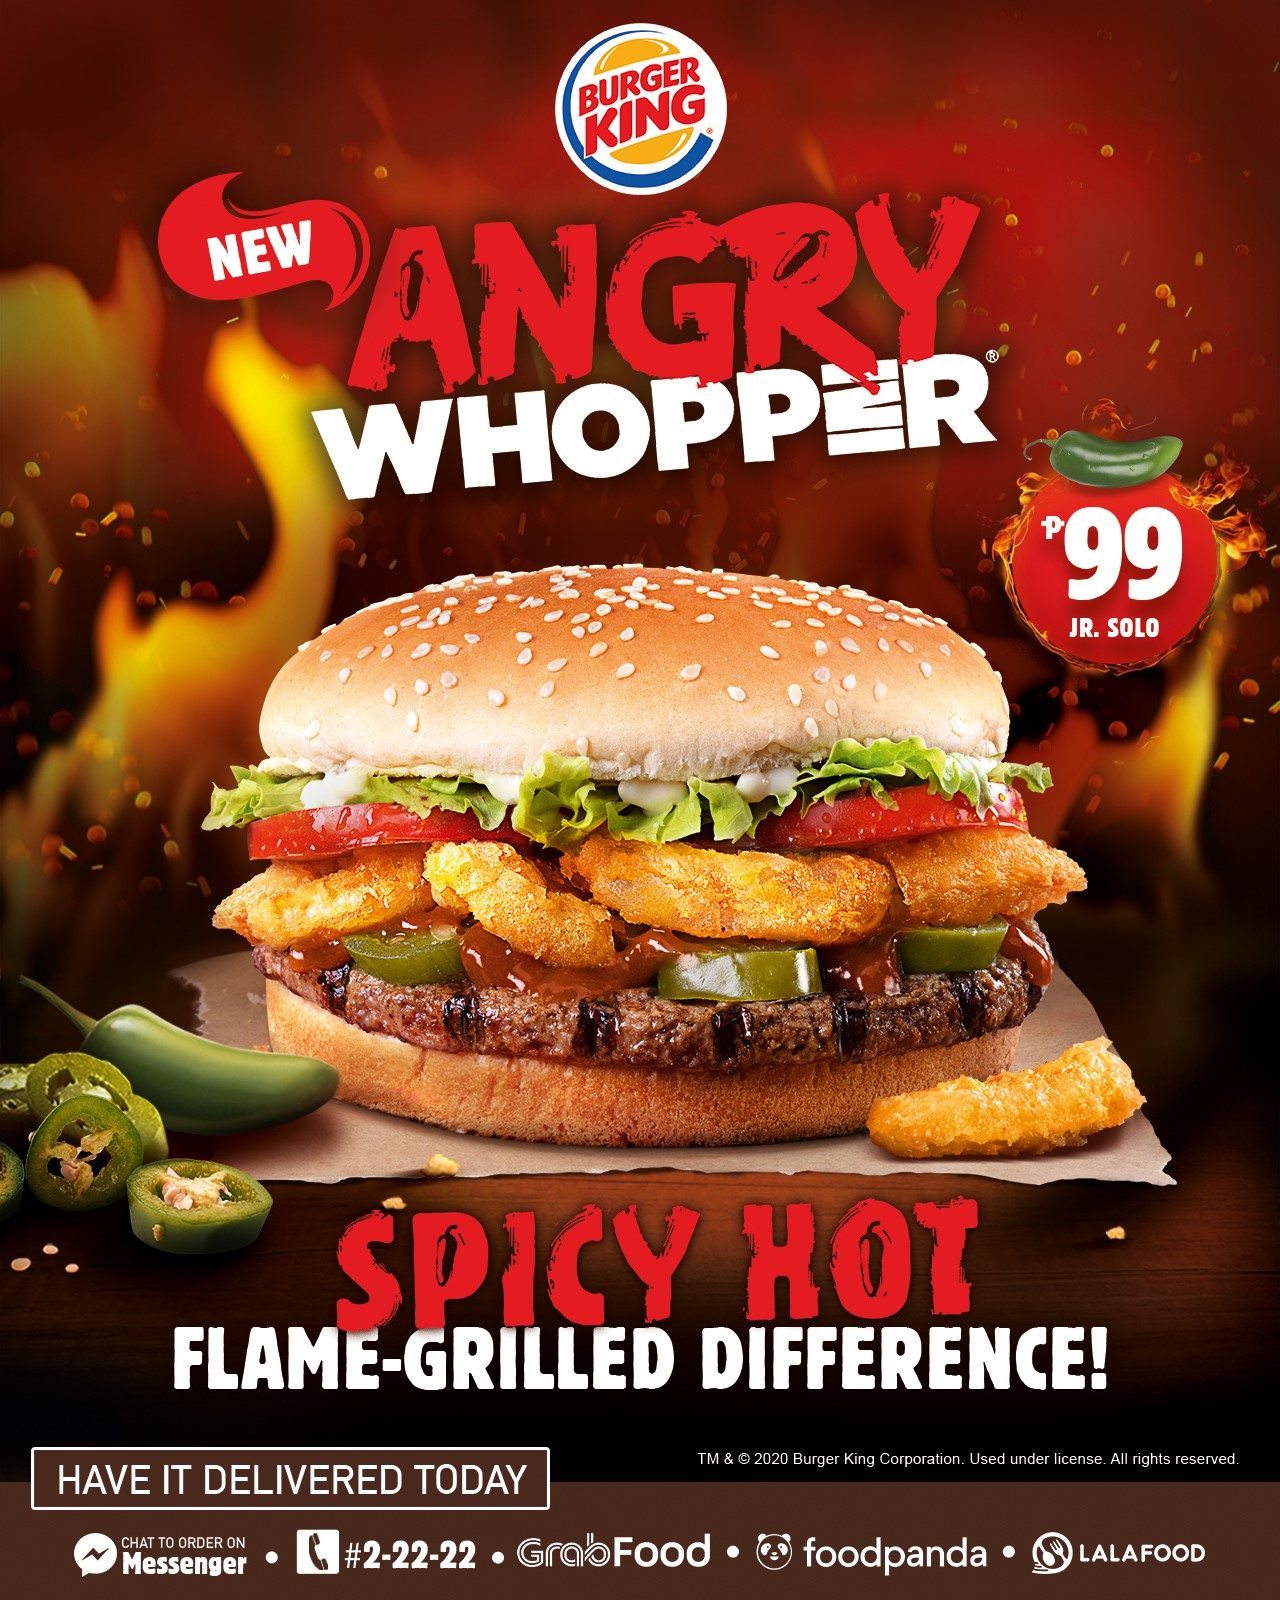 Burger King now has a spicy ‘Angry Whopper’